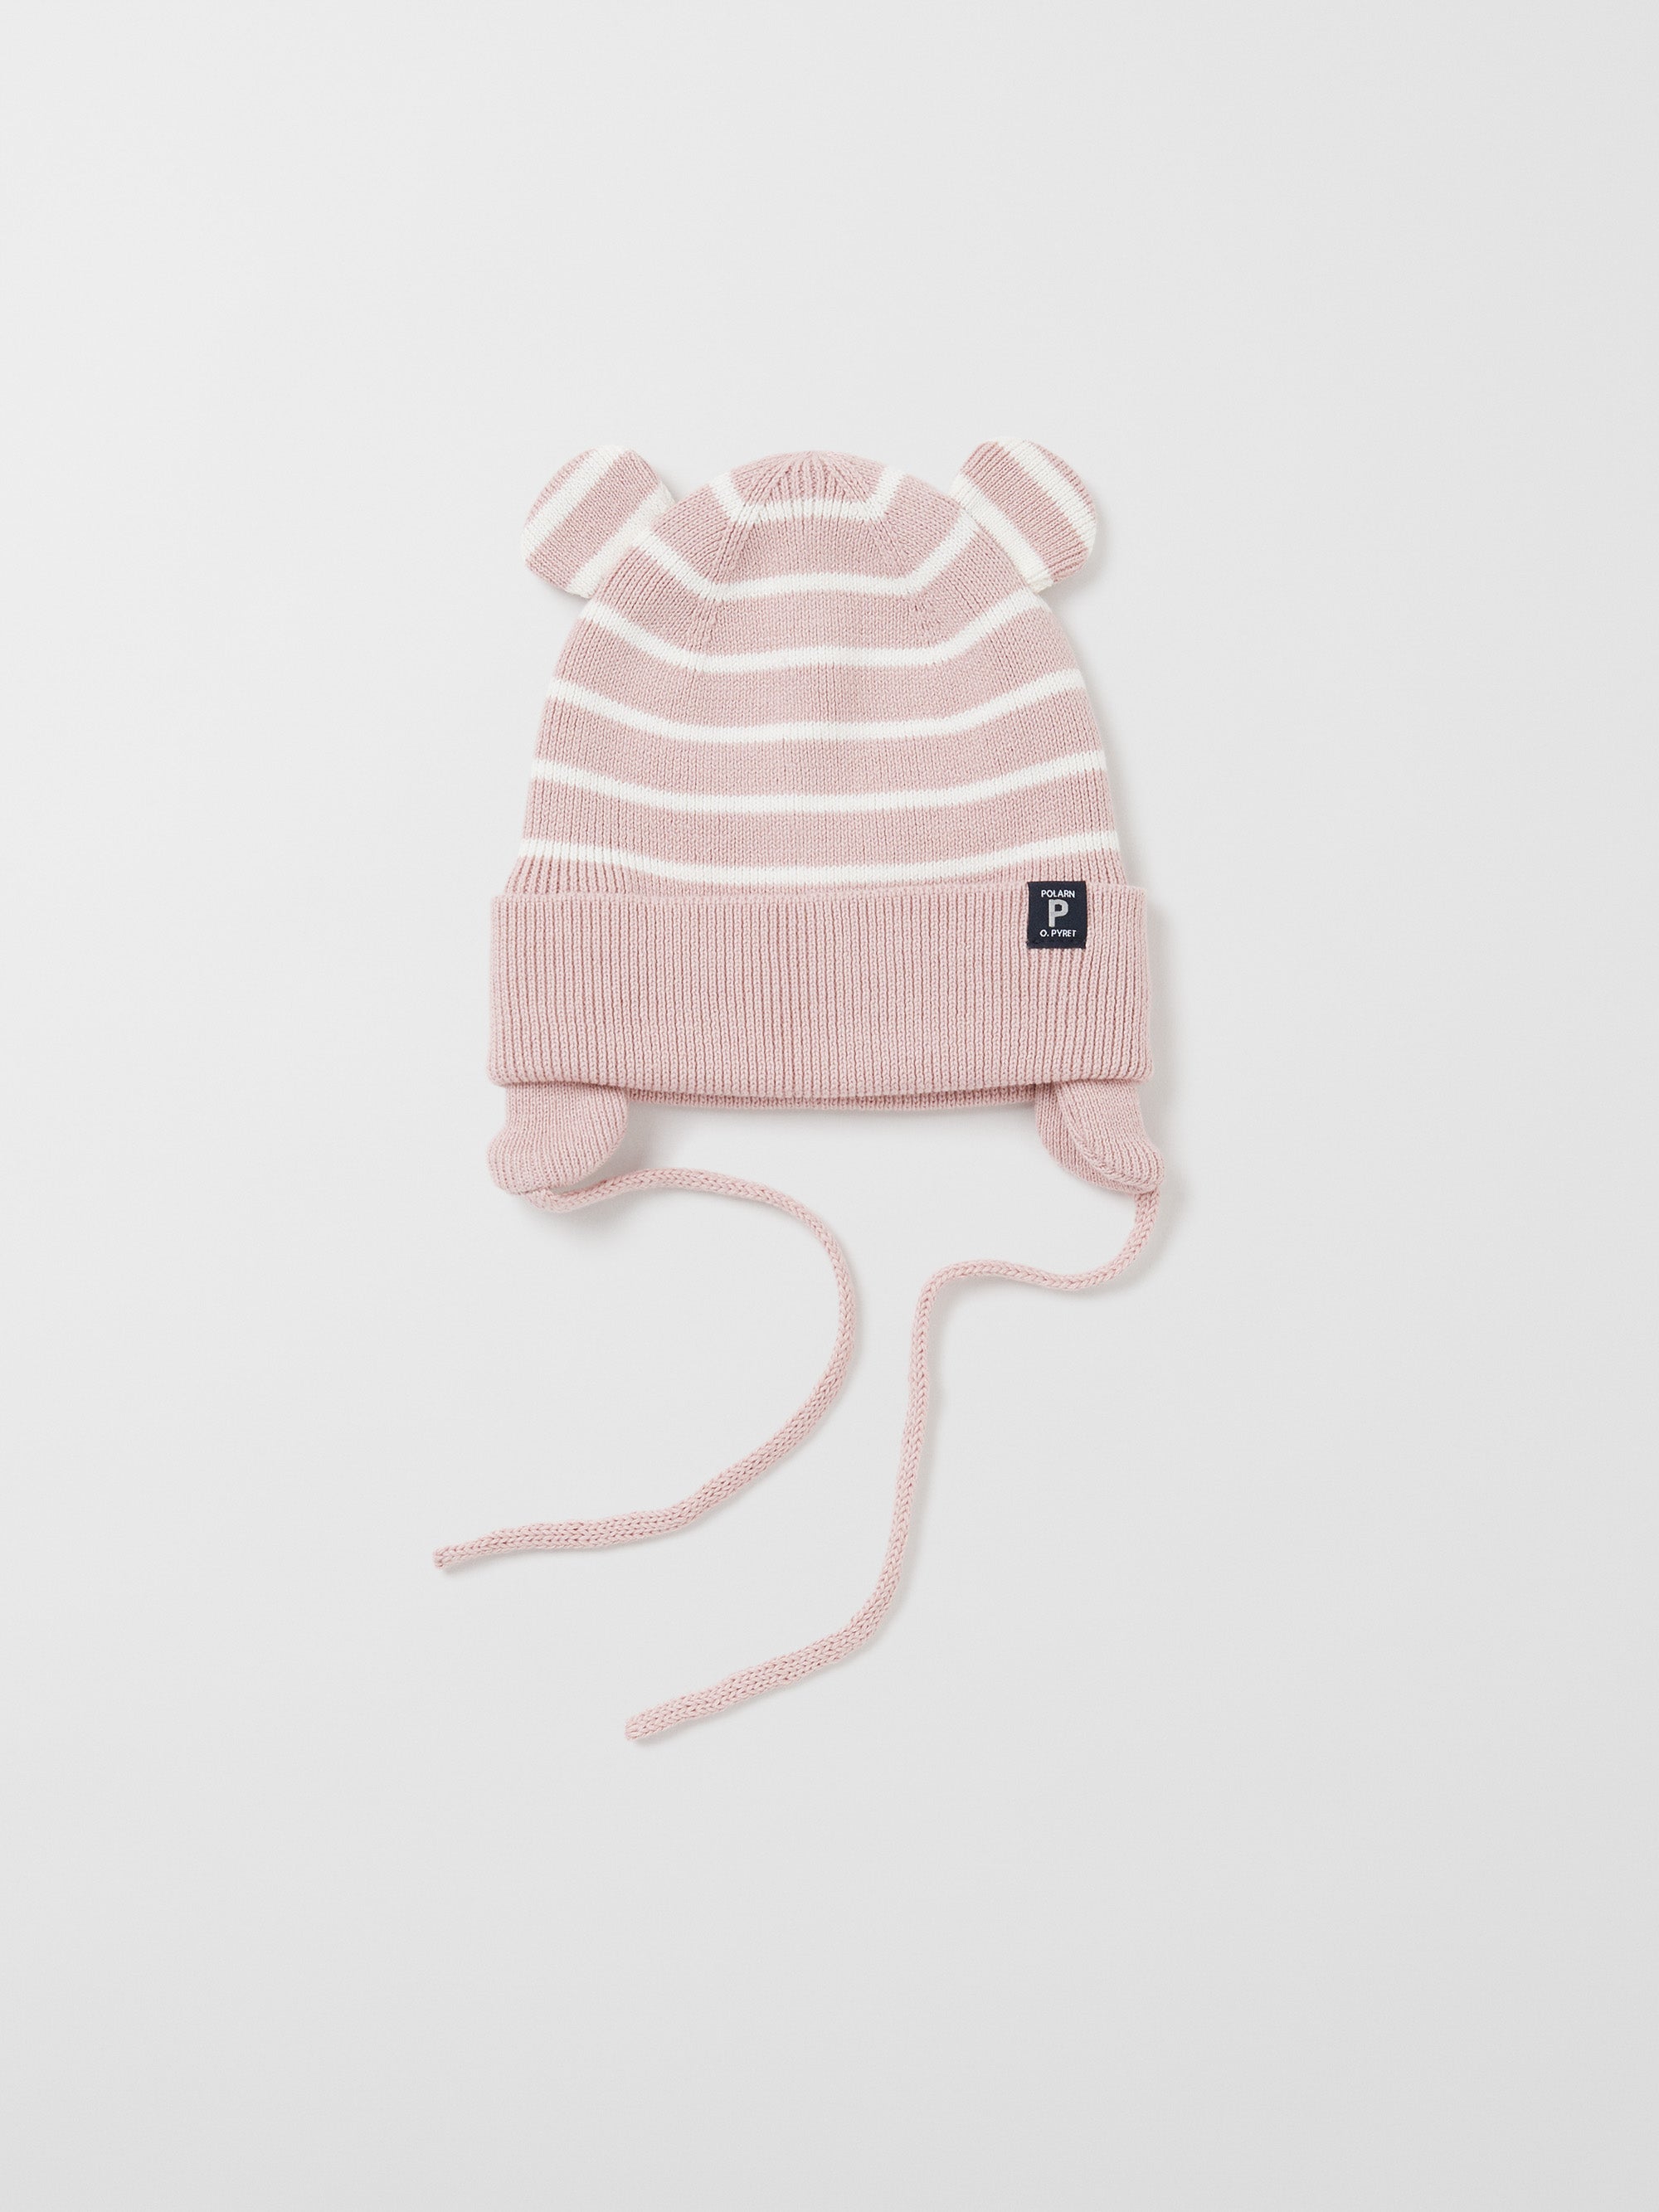 Striped Knitted Baby Hat